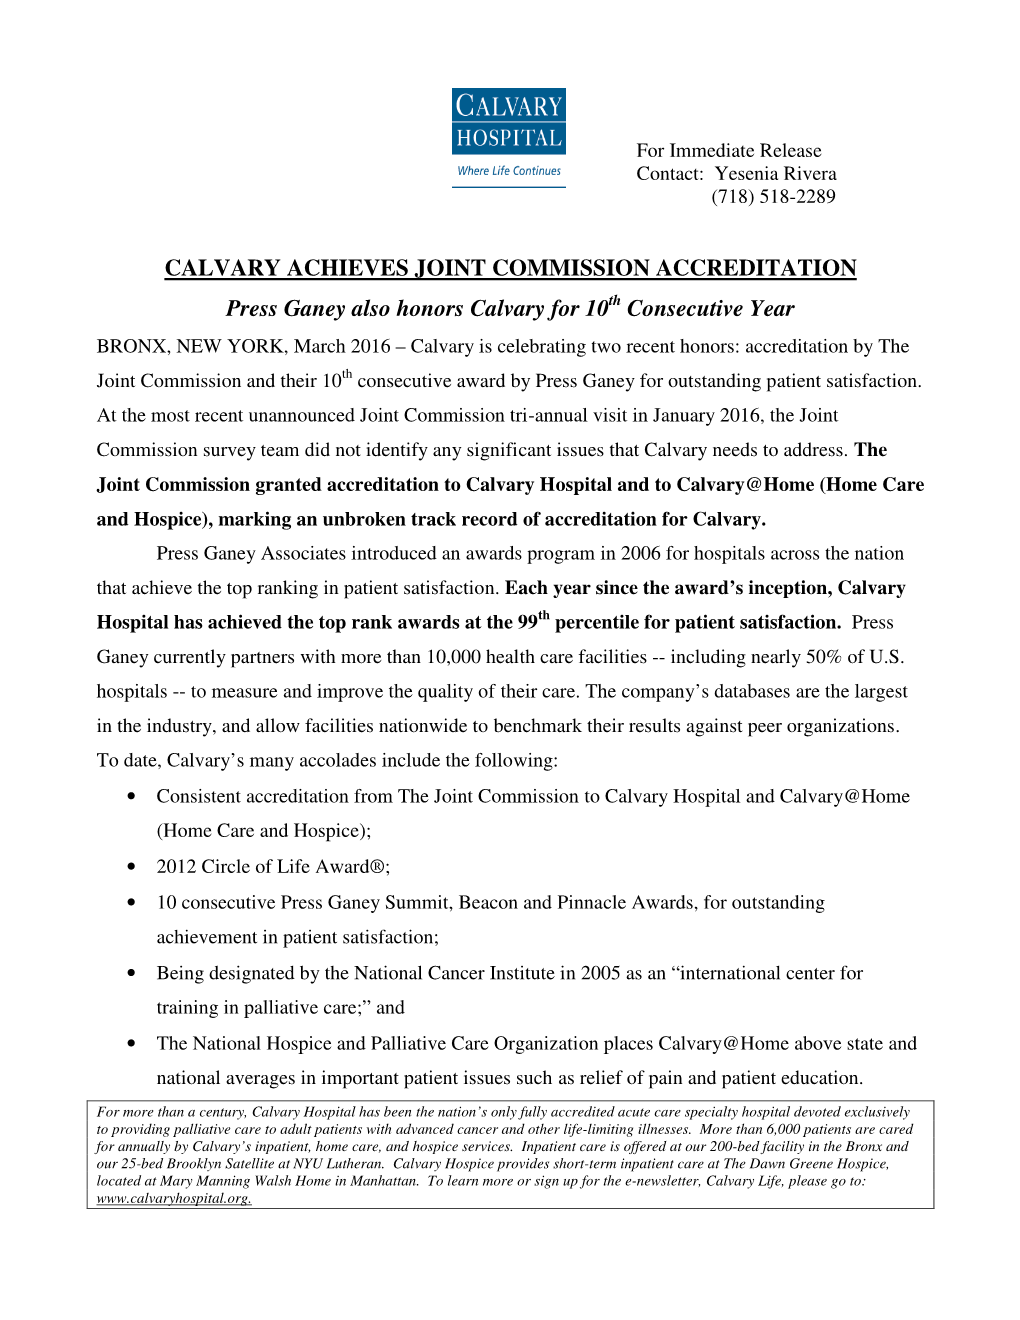 Calvary Achieves Joint Commission